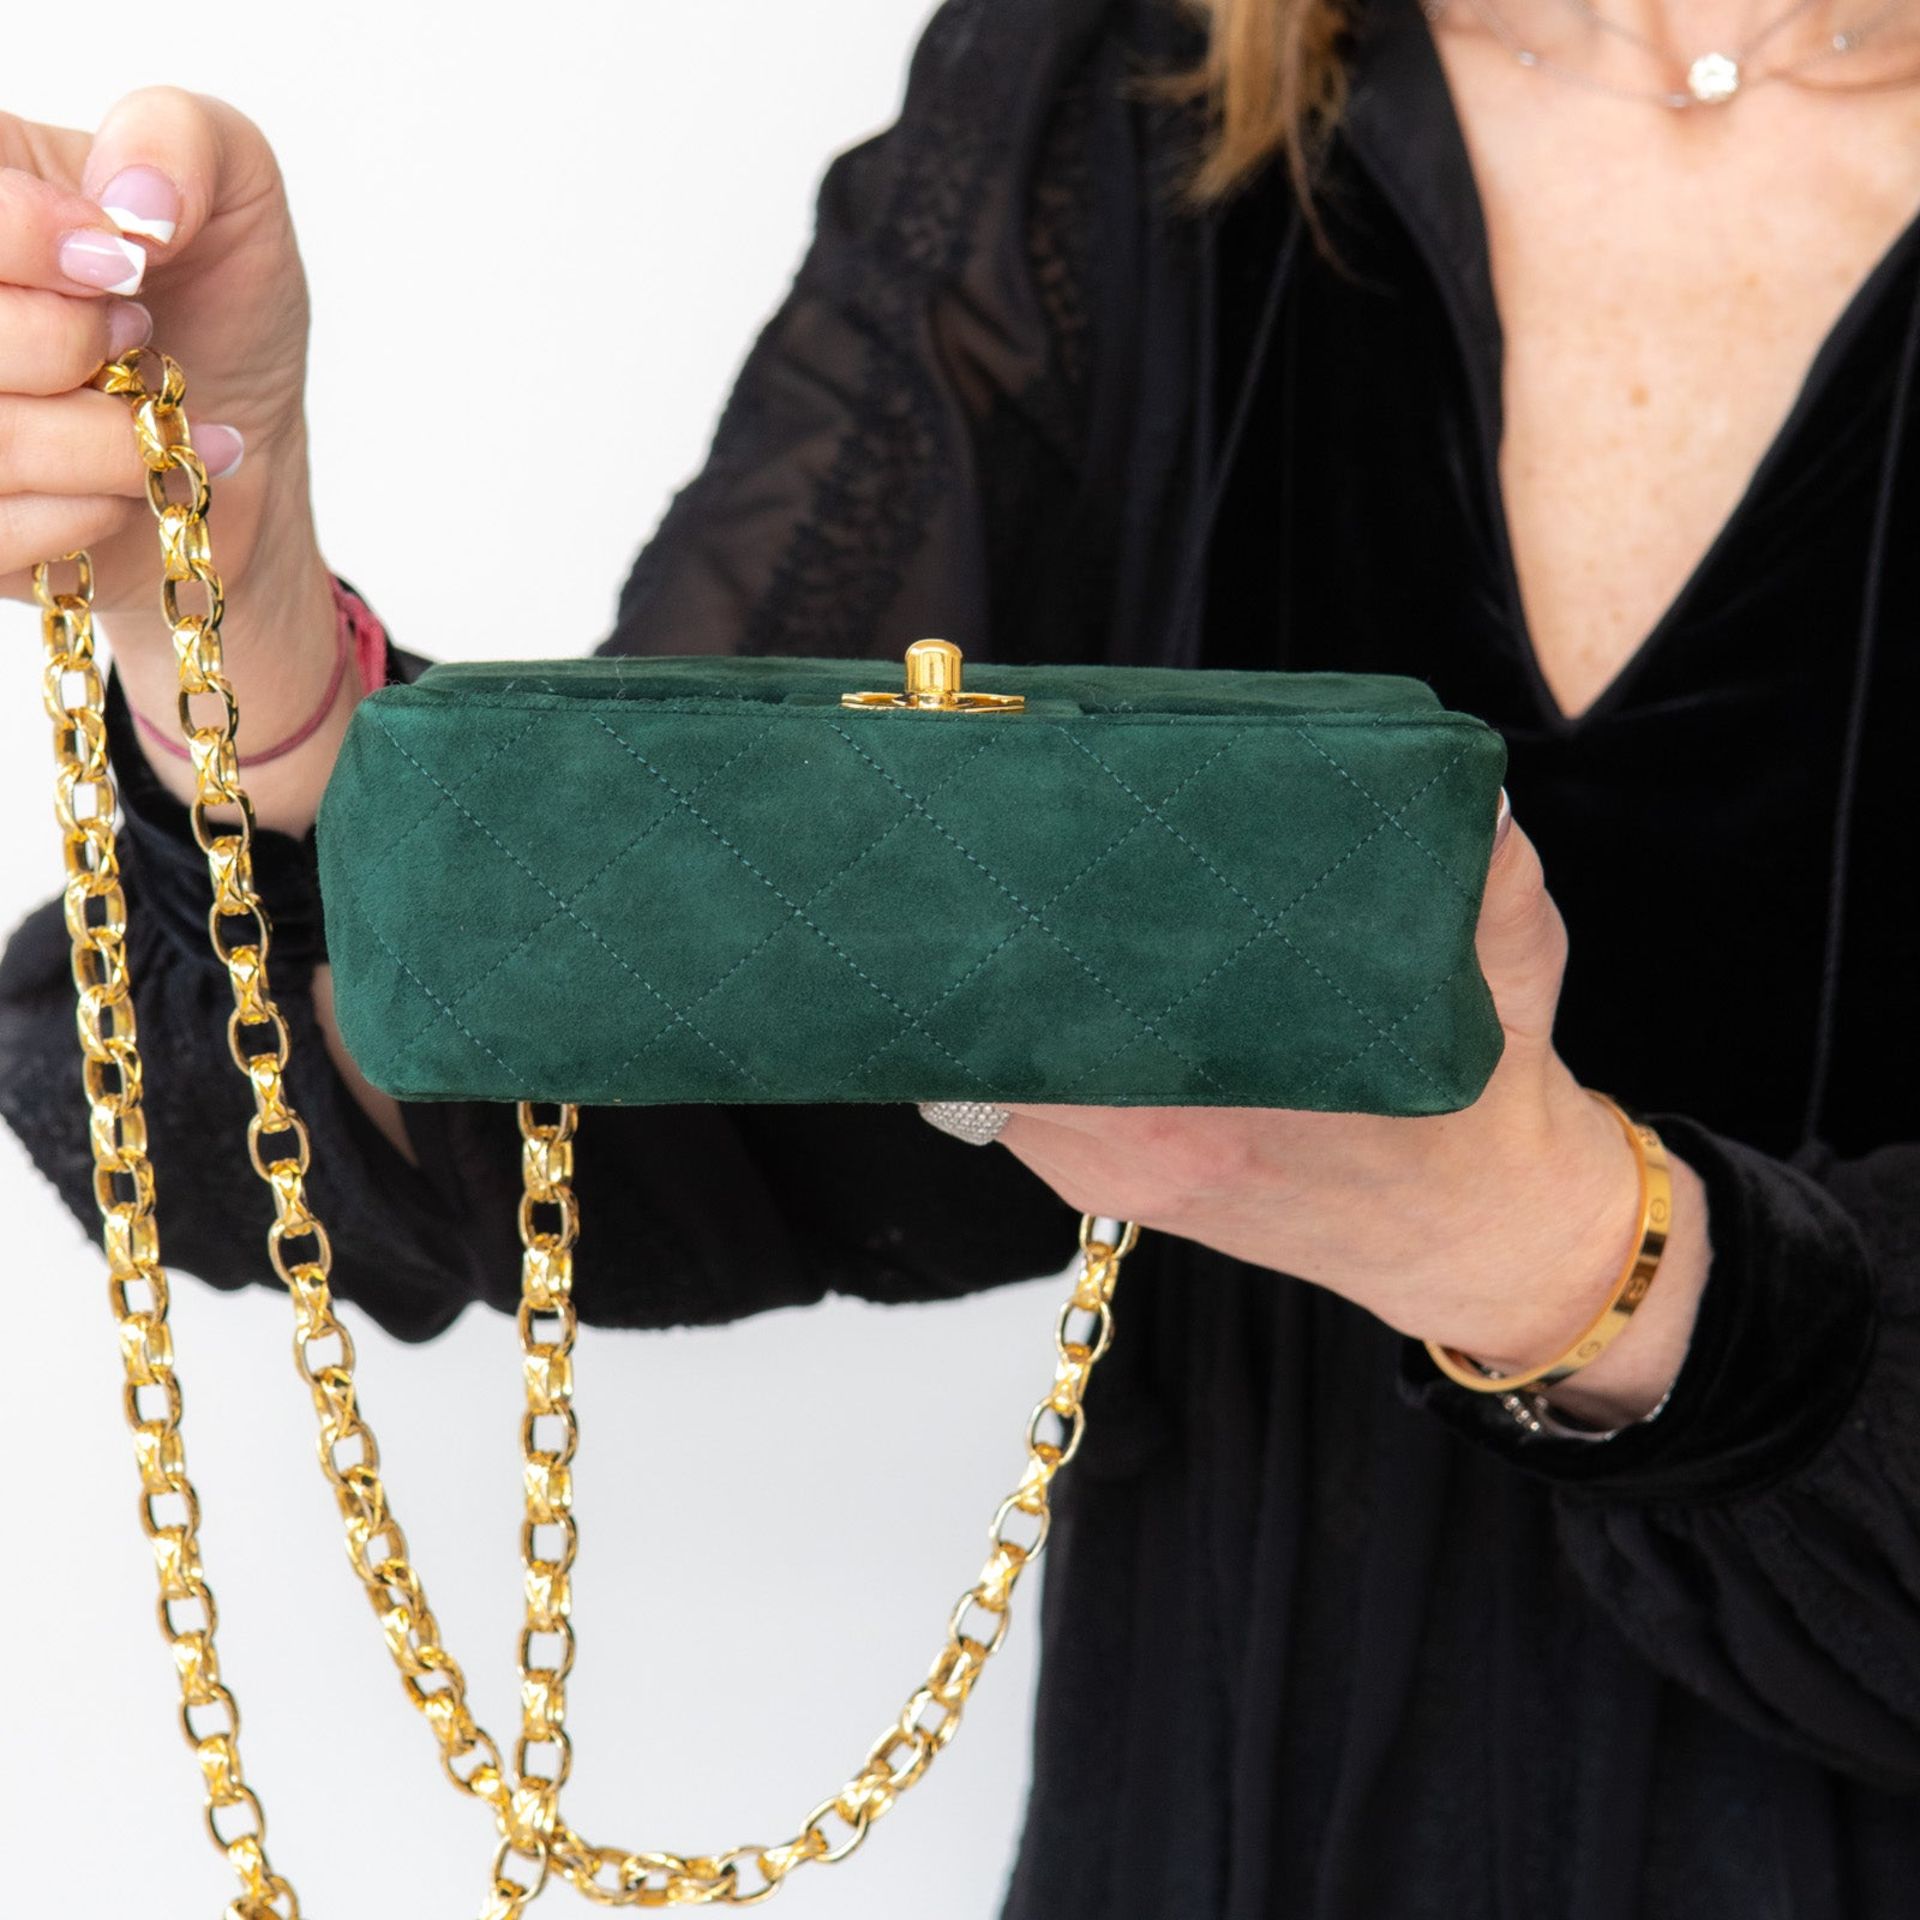 Chanel Vintage Green Mini Square Suede Flap Bag - Image 7 of 16